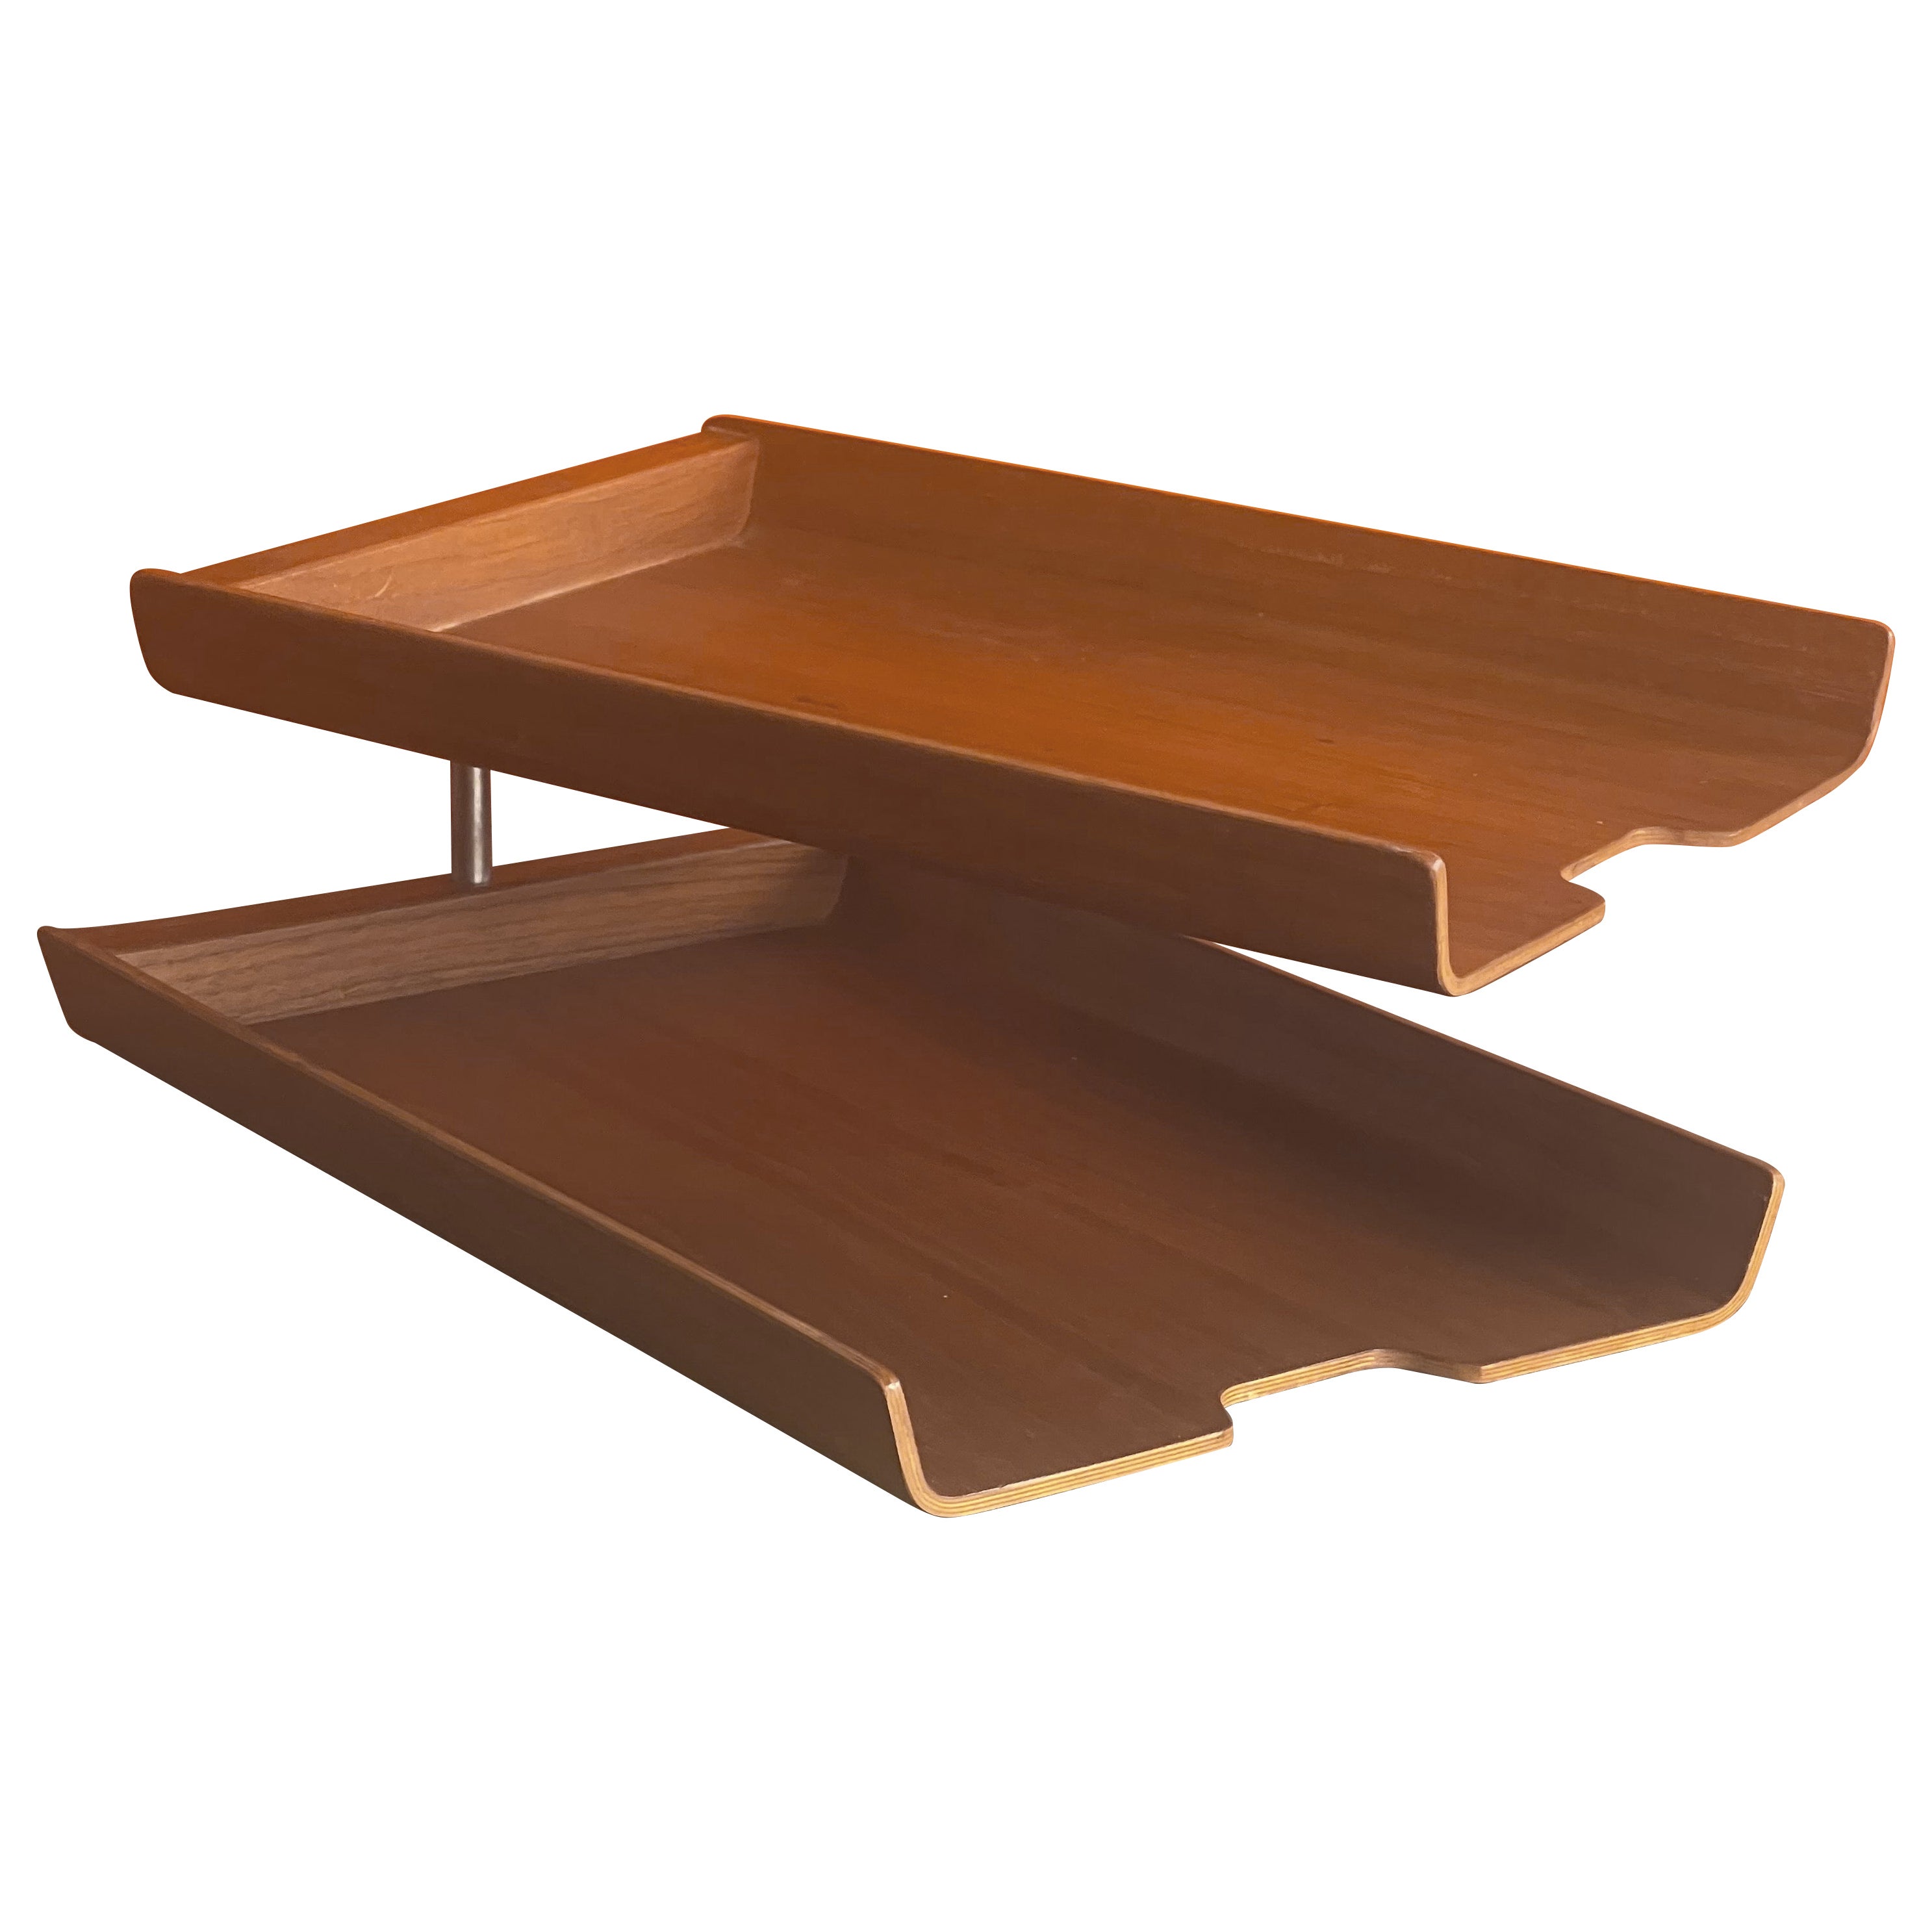 Molded Teak Plywood Double Letter Tray by Martin Aberg for Rainbow of Sweden For Sale